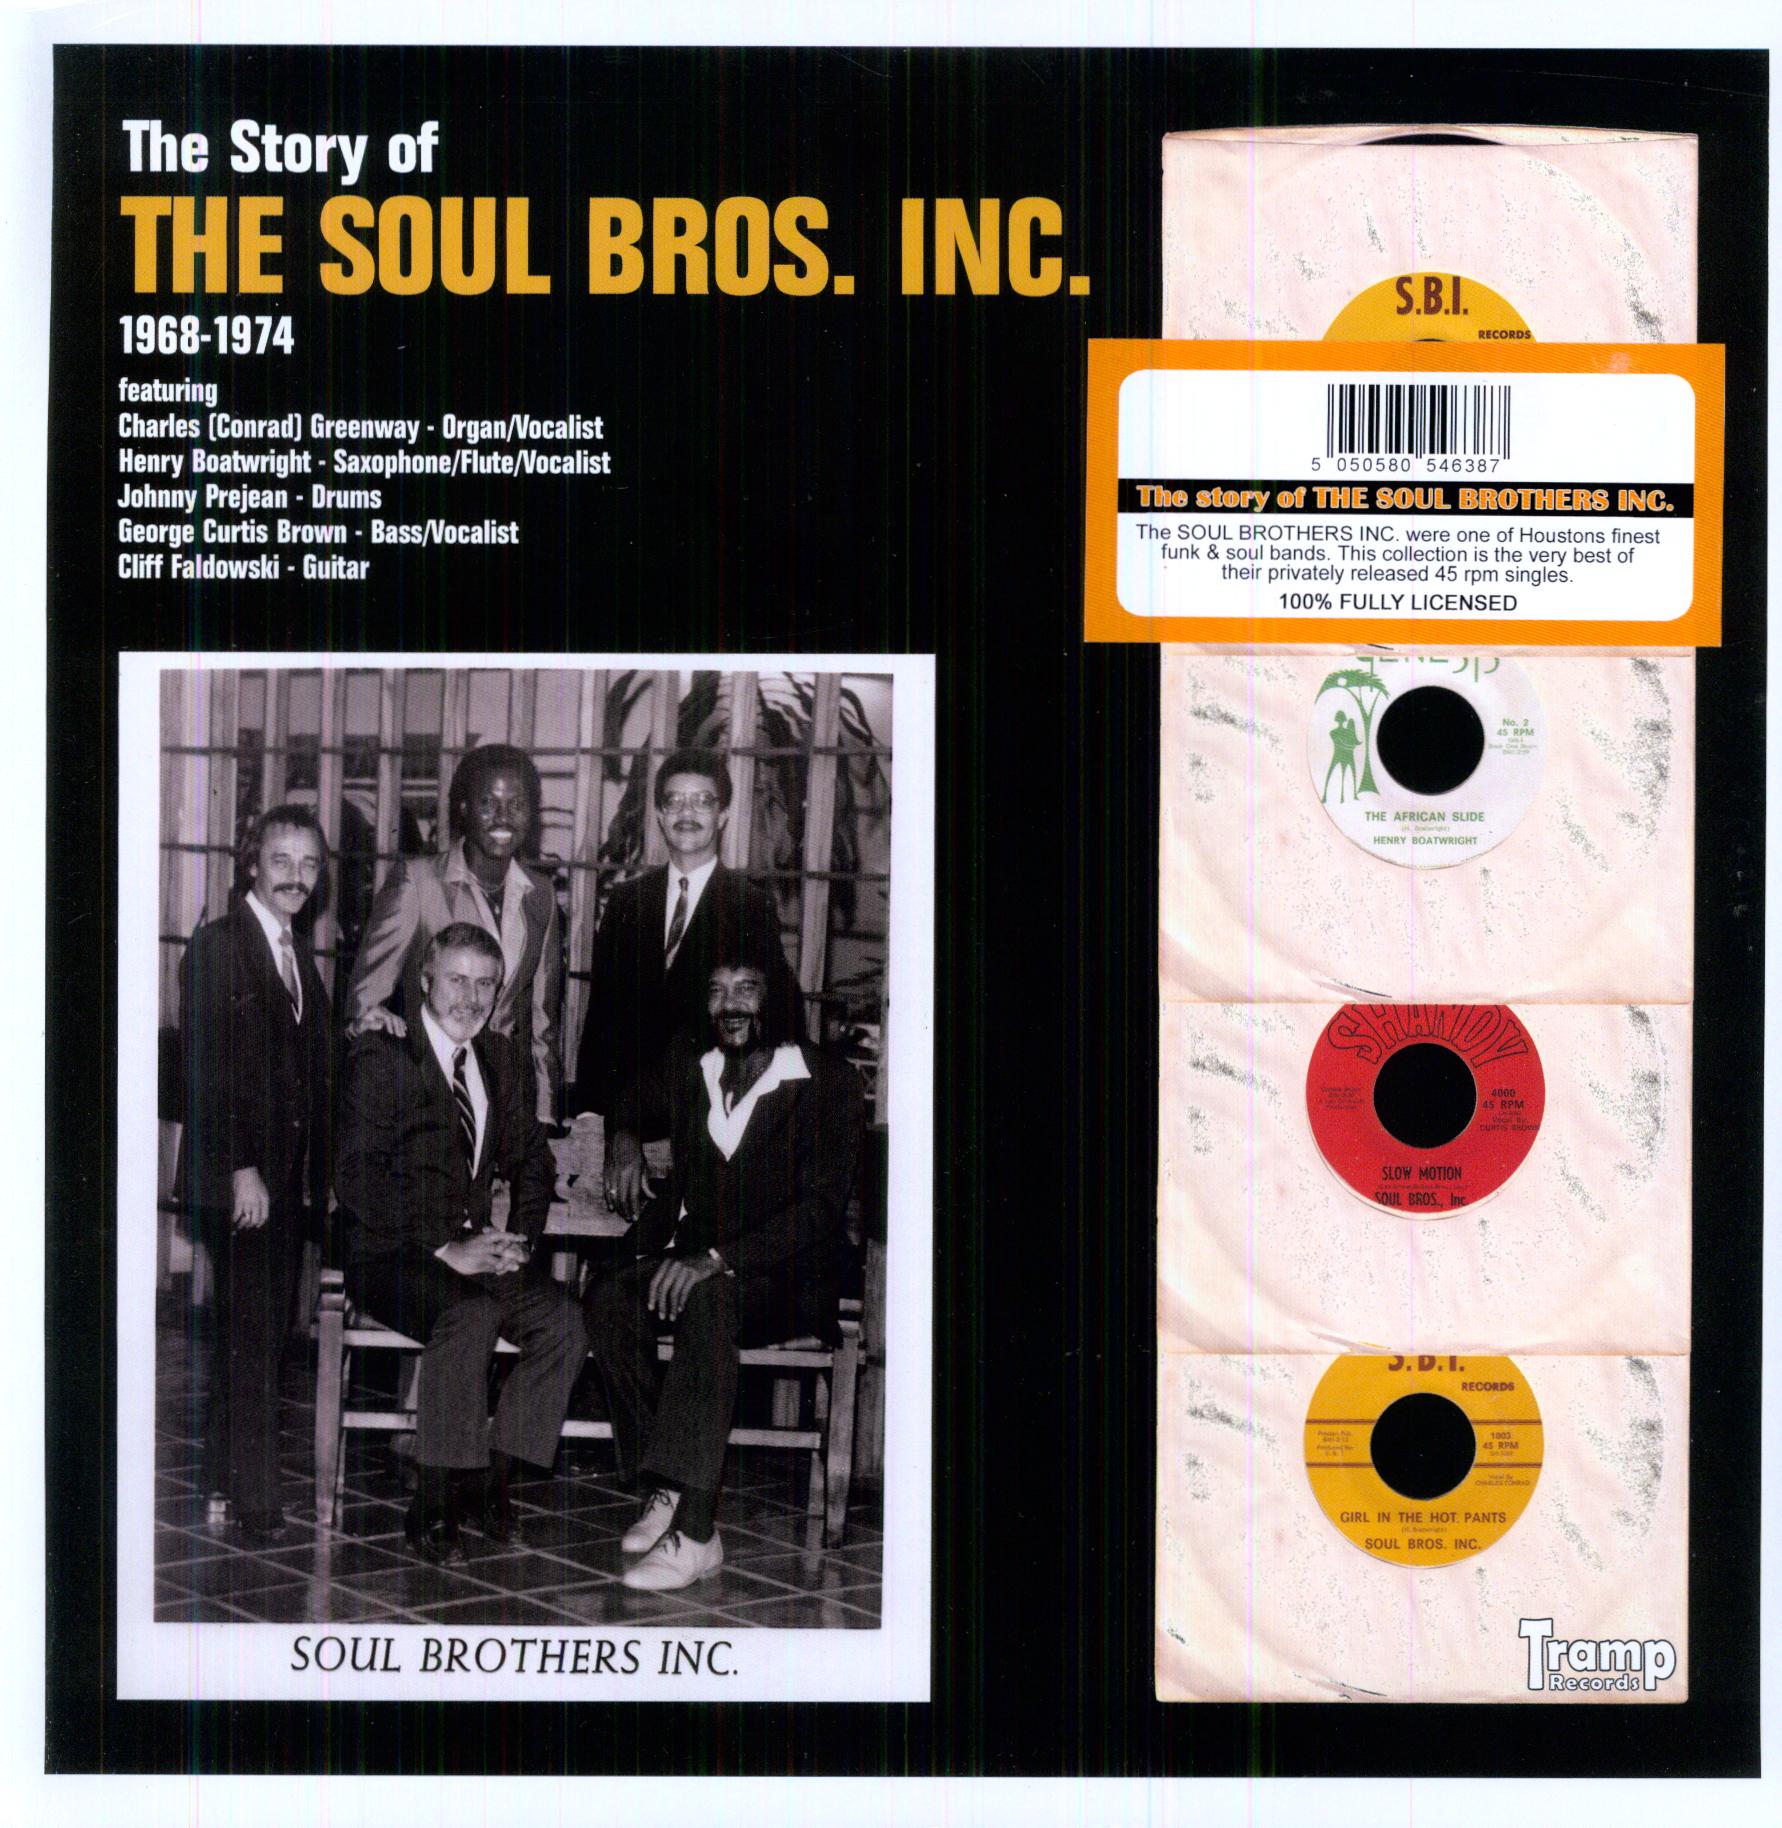 STORY OF THE SOUL BROS INC 1968-1974